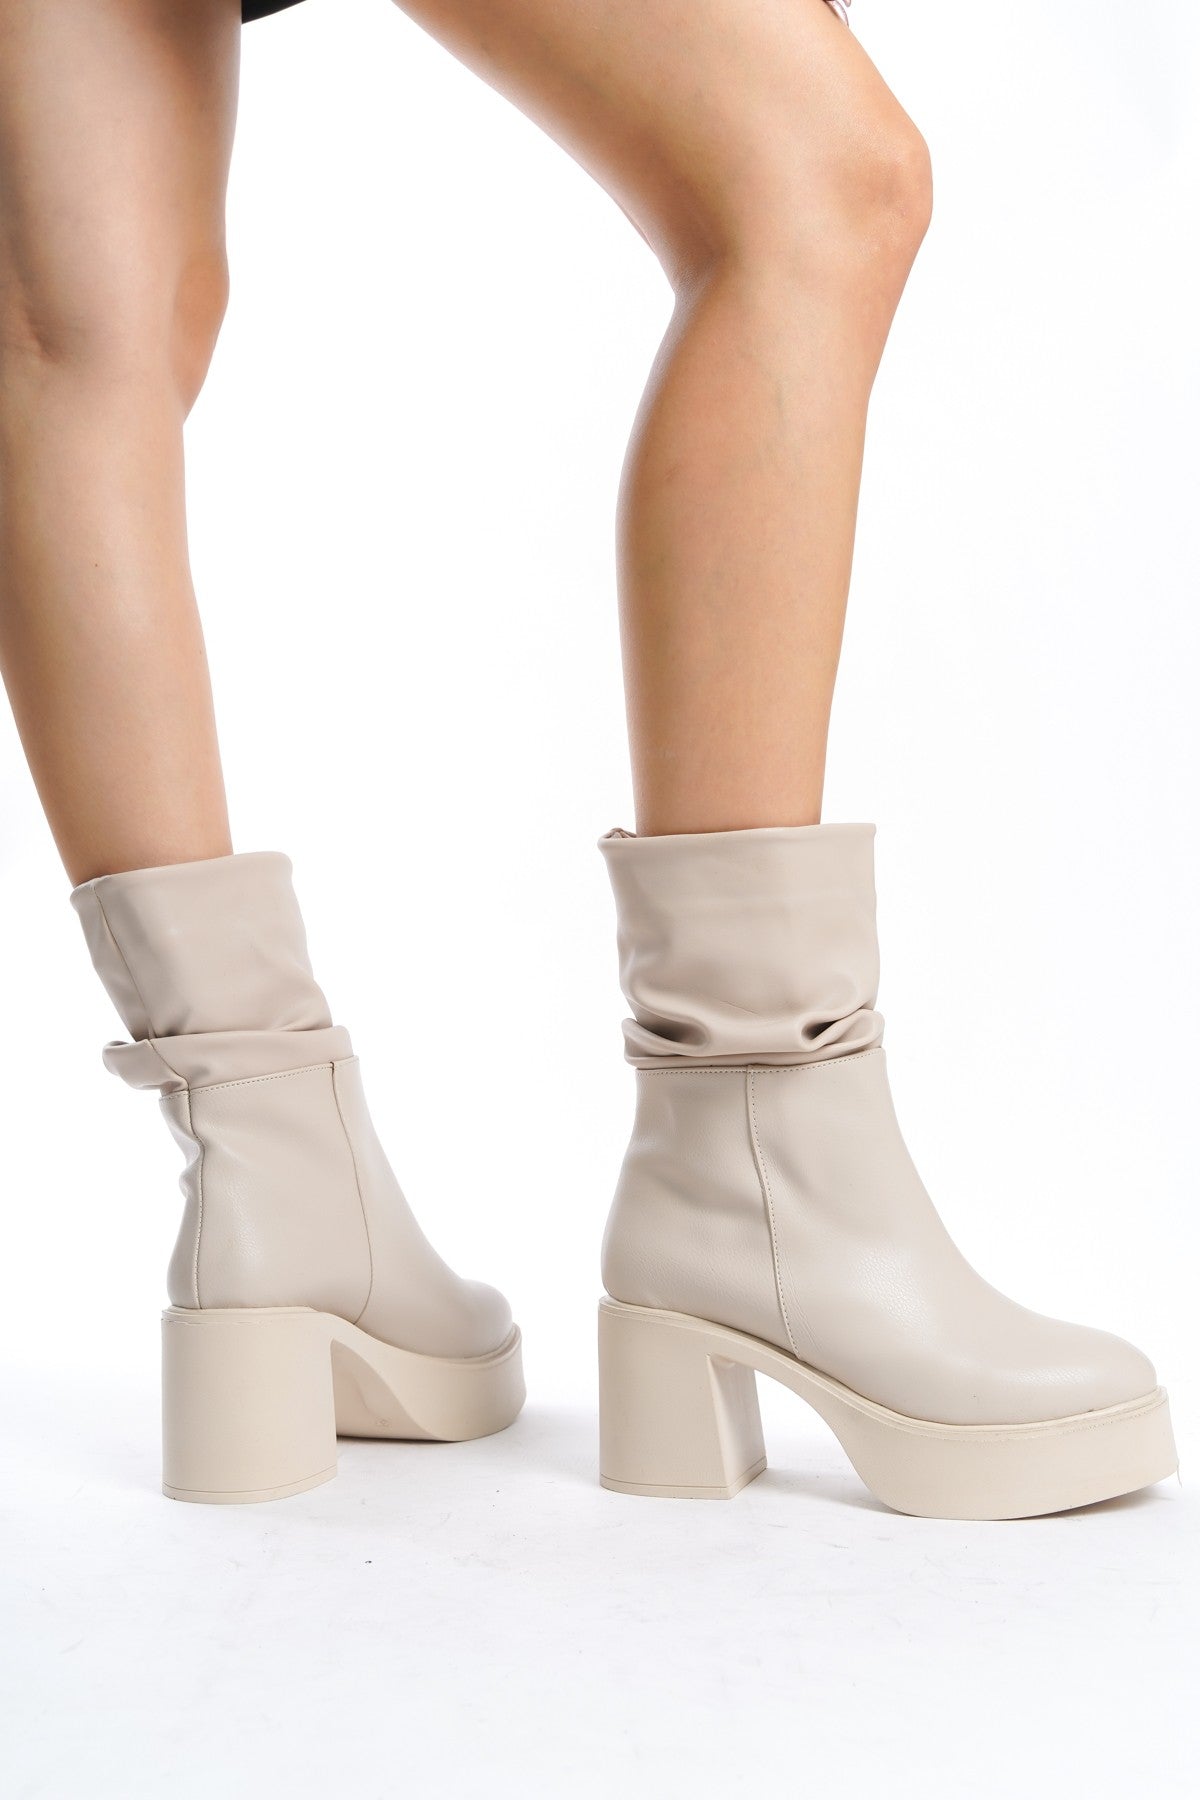 Women's Milda Beige Leather Bellows Boots - STREETMODE ™